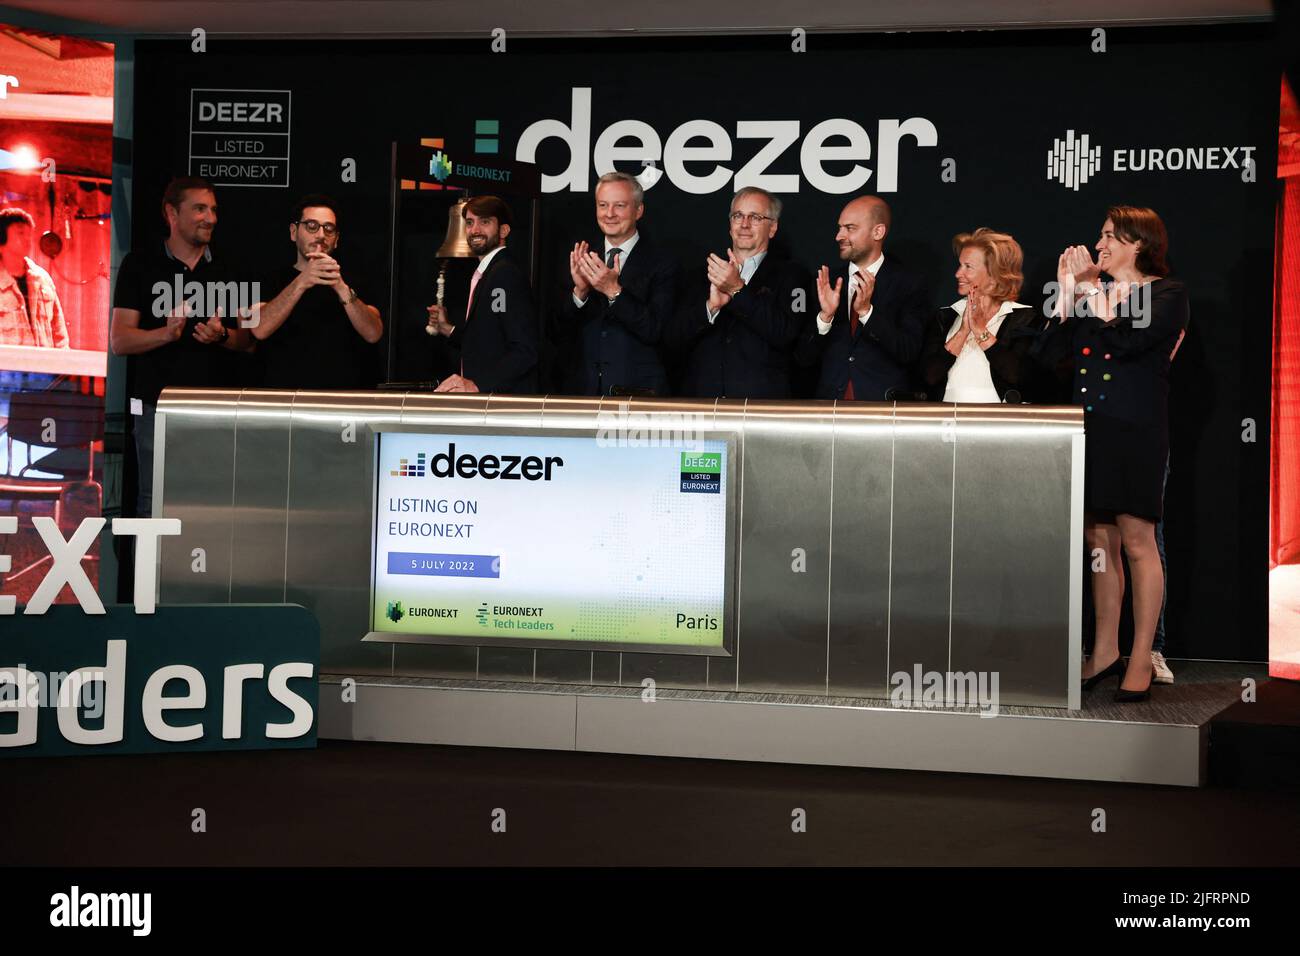 Paris, France, July 5, 2022. Deezer CEO Jeronimo Folgueira, French Economy and Finance Minister Bruno Le Maire, French Junior minister for Digital Transition and Telecommunications Jean-Noel Barrot and President of WarnerMedia France Iris Knobloch at the Deezer's listing ring the ball ceremony on the Pan-European stock exchange Euronext at Euronext headquarters in La Defense business district near Paris, France on July 5, 2022. Photo by Christophe Michel/ABACAPRESS.COM Stock Photo